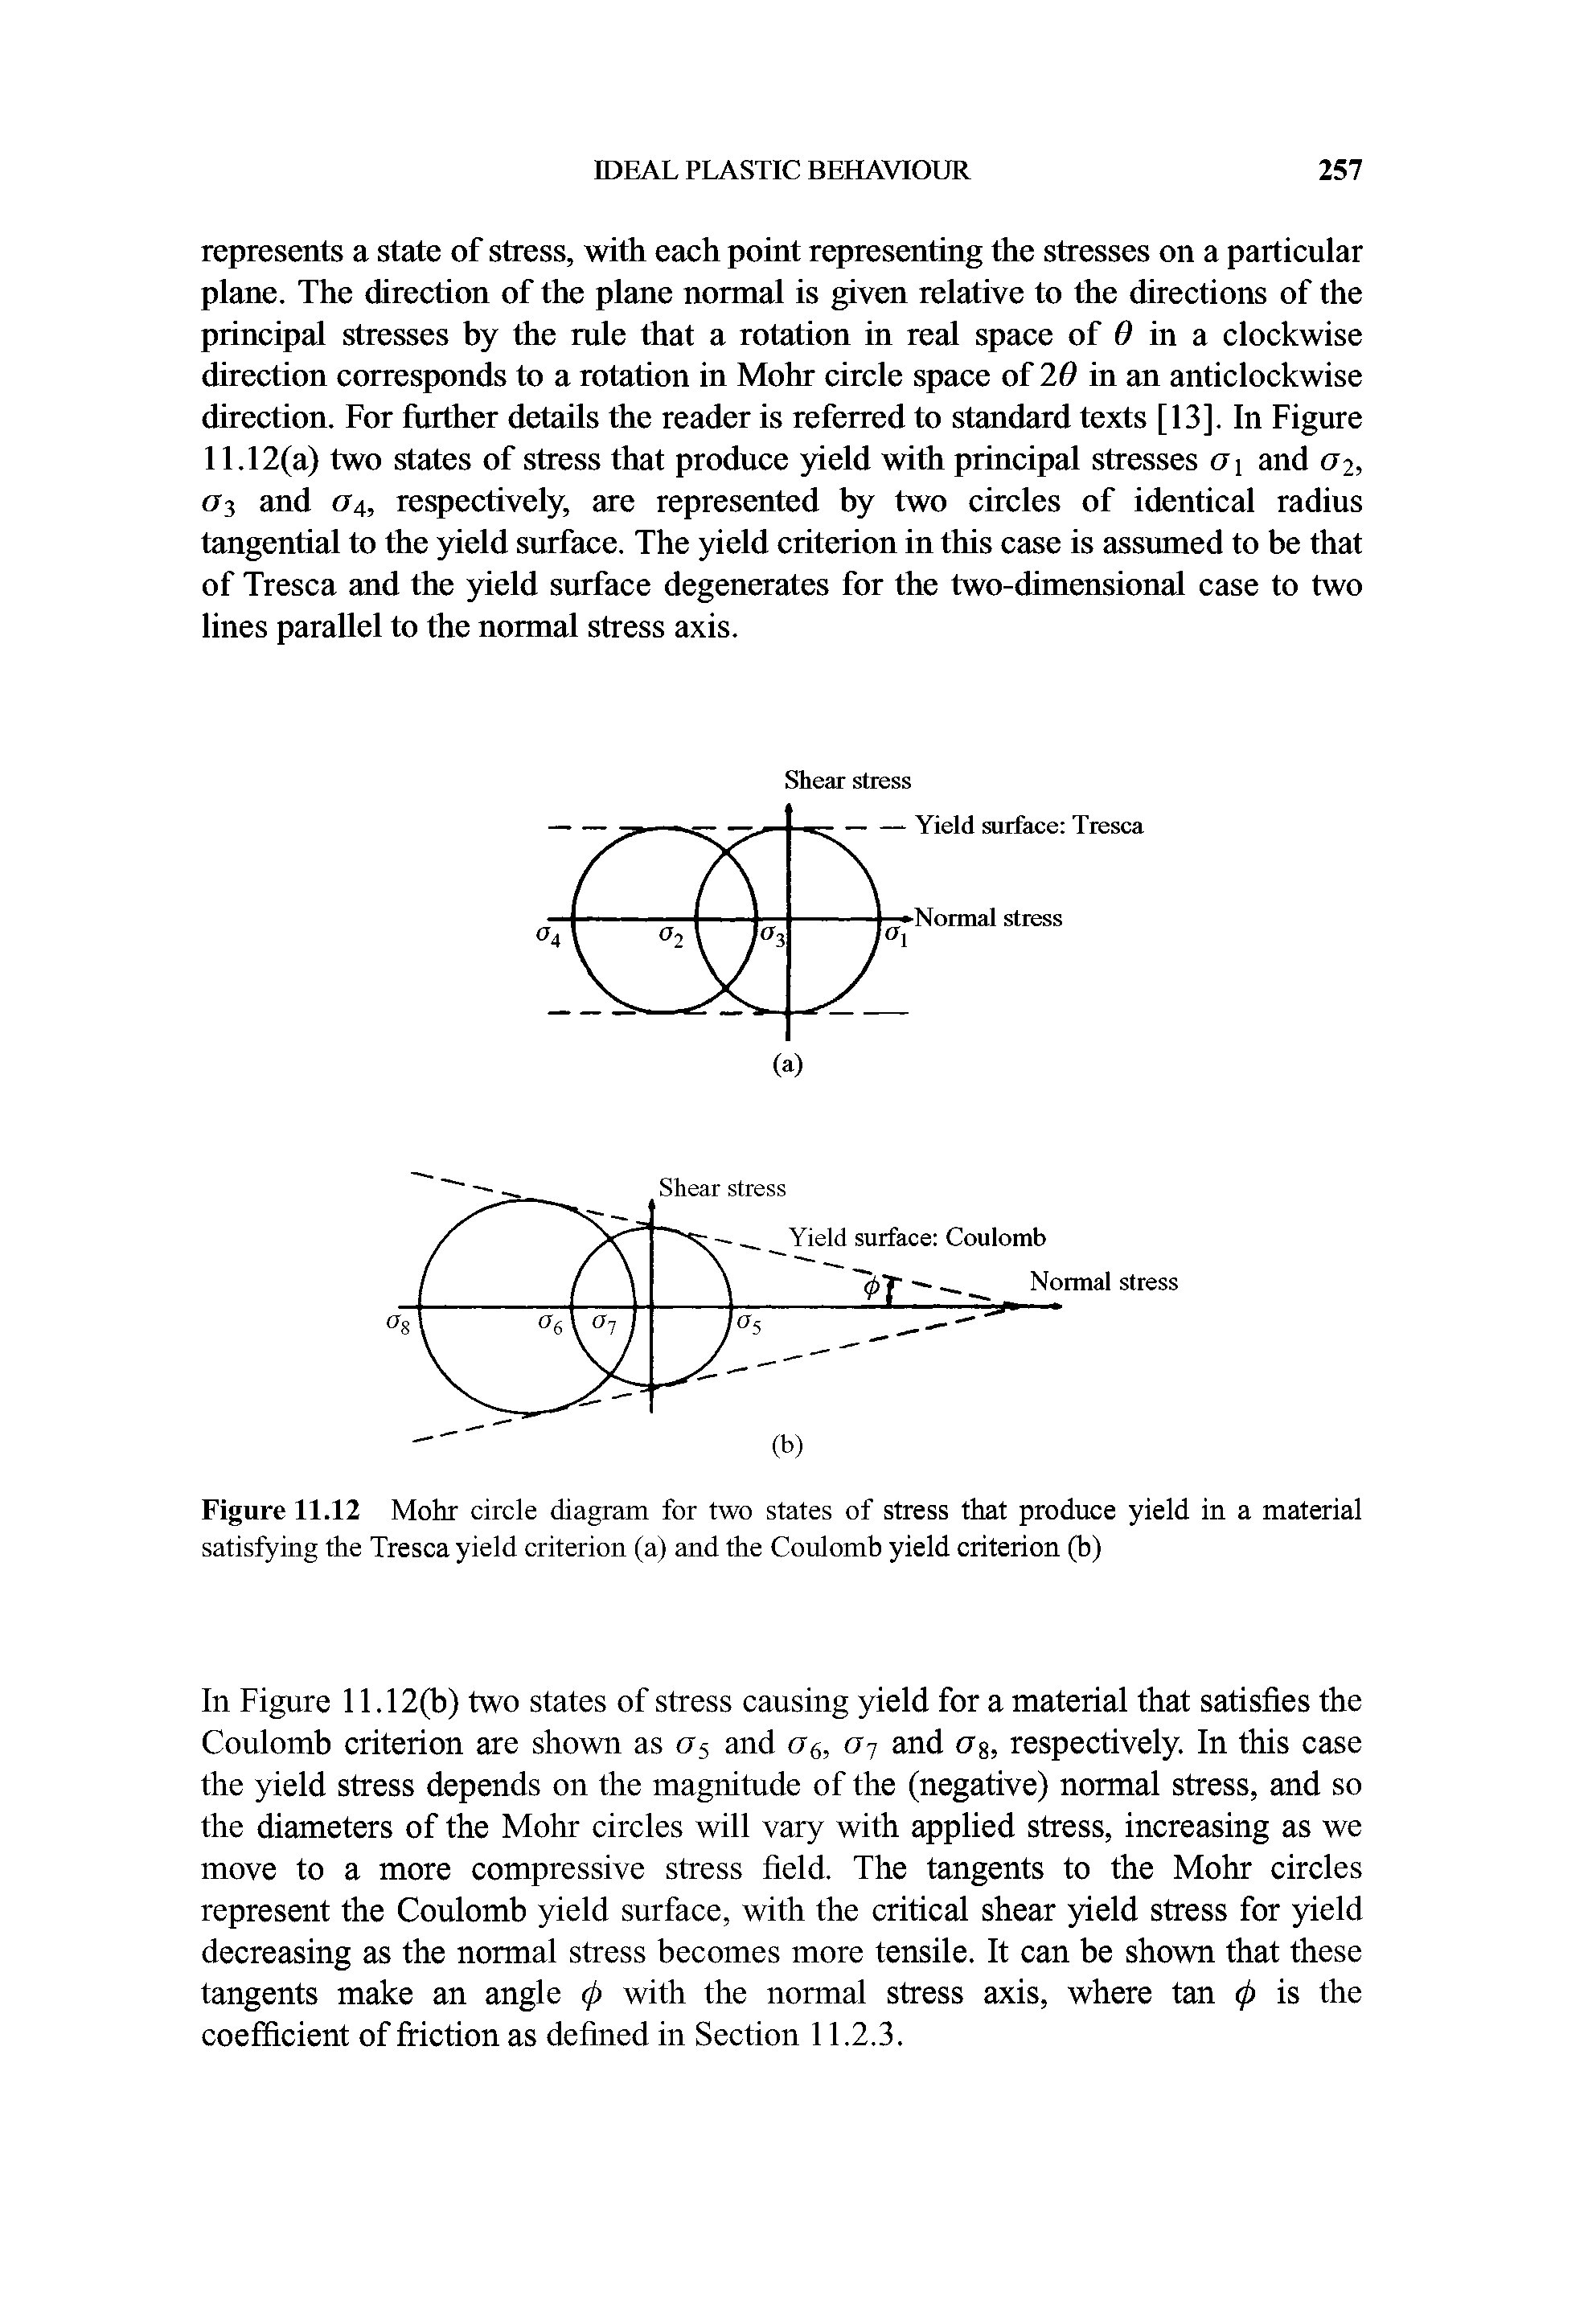 Figure 11.12 Mohr circle diagram for two states of stress that produce yield in a material satisfying the Tresca yield criterion (a) and the Coulomb yield criterion (h)...